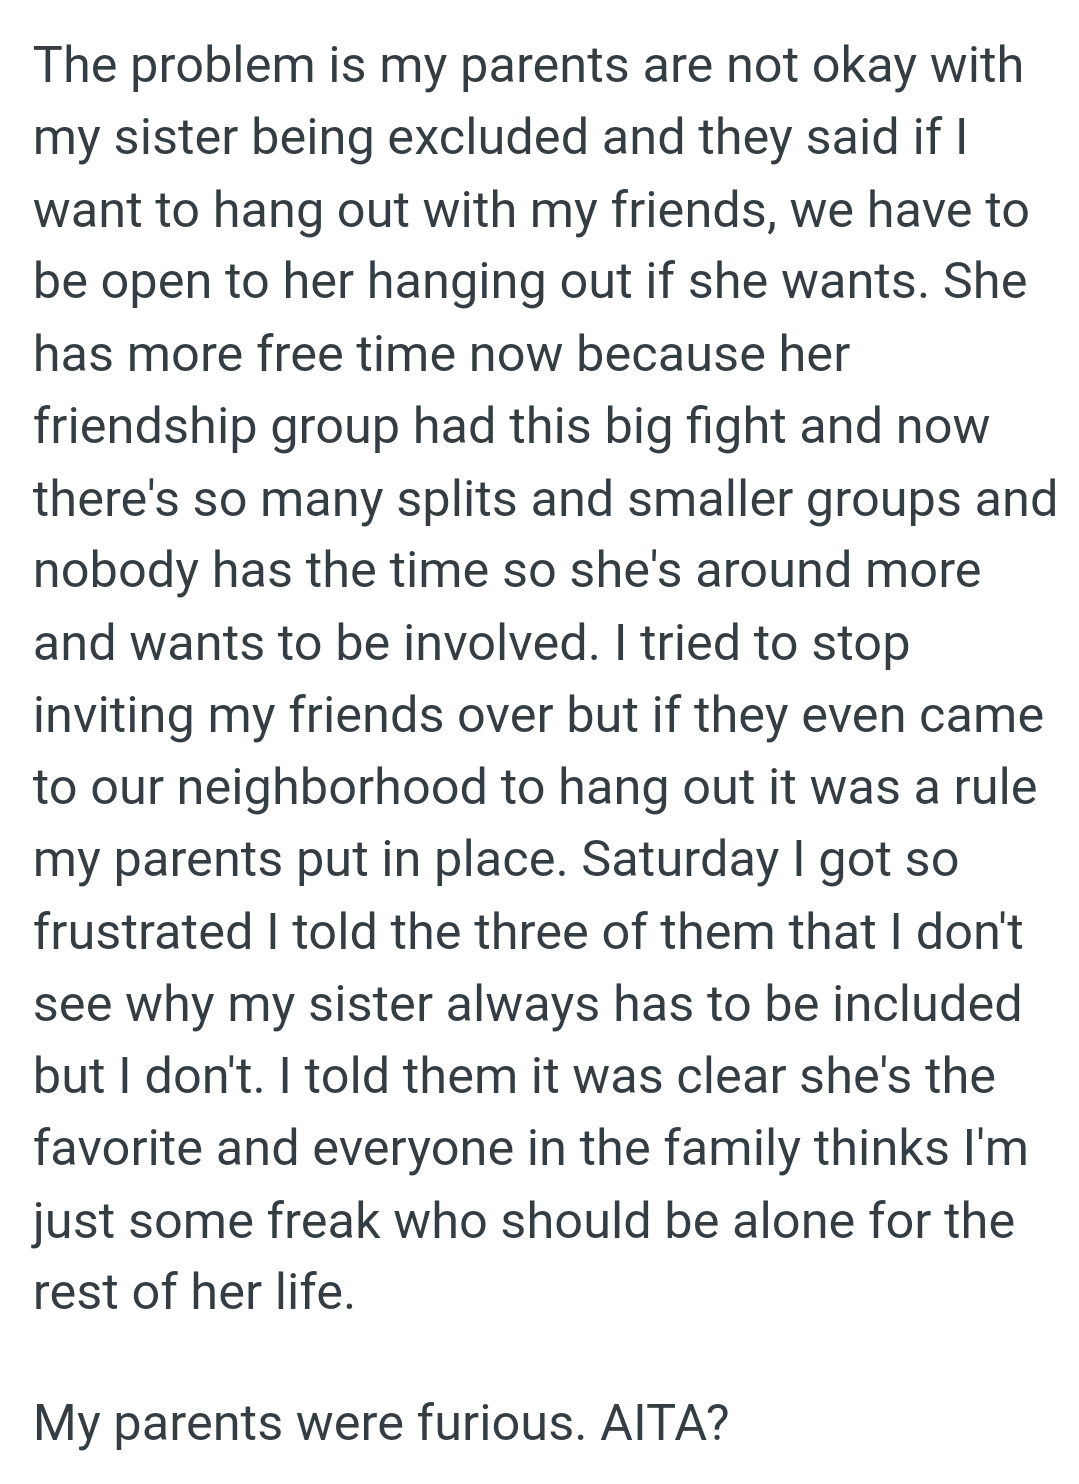 OP doesn't see why her sister always has to be included but she doesn't